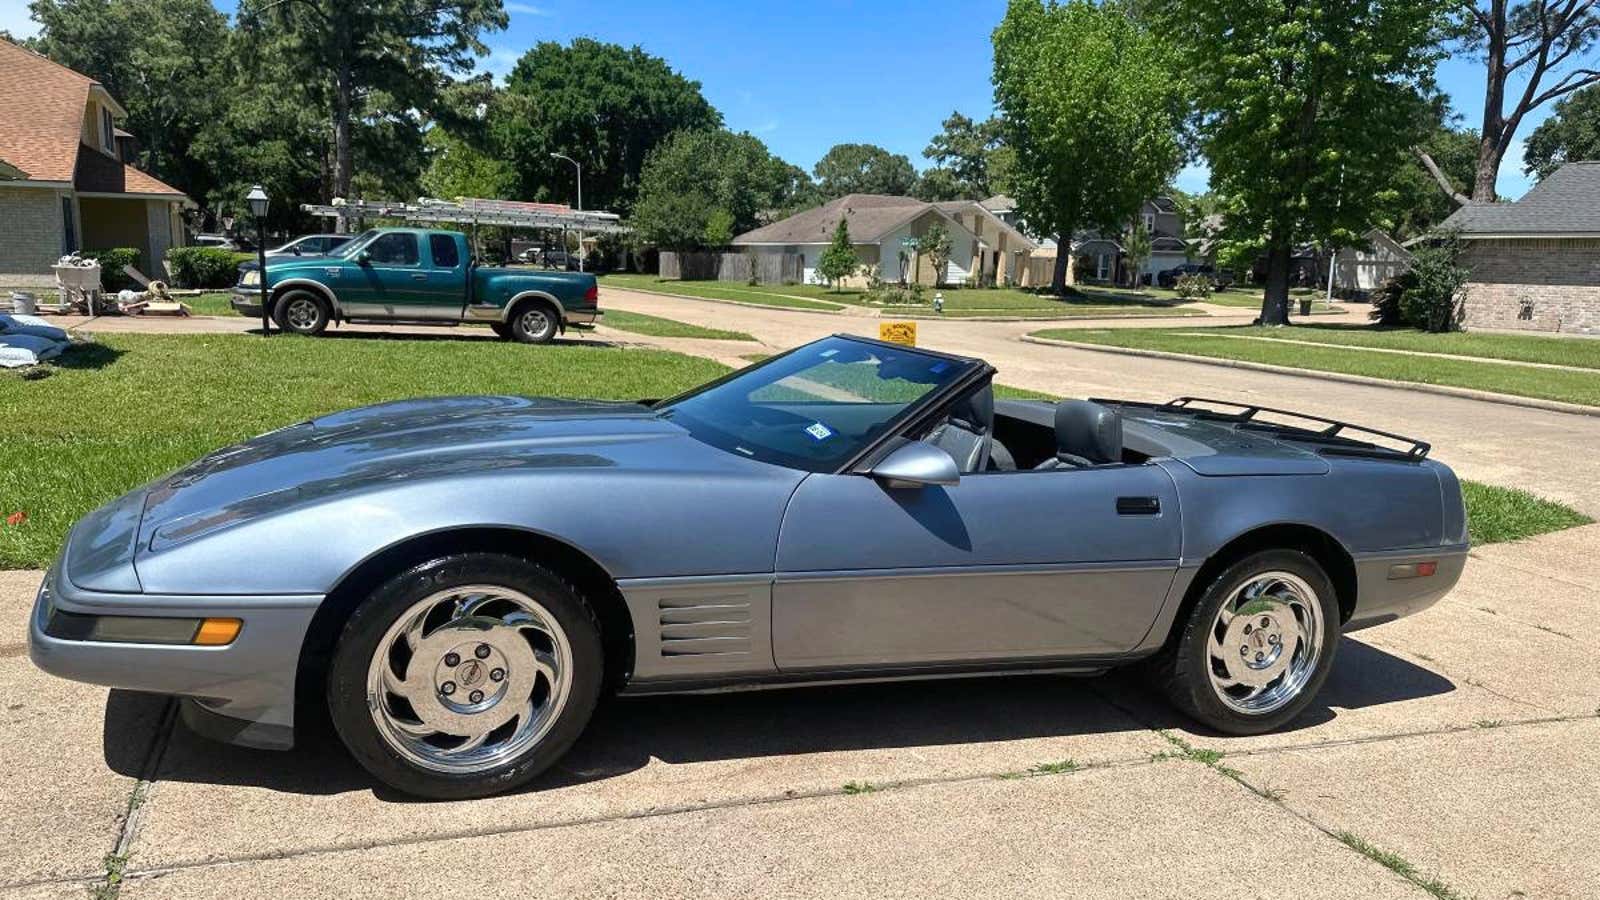 Image for At $7,400, Is This 1991 Chevy Corvette A ‘Super Rare’ Deal?